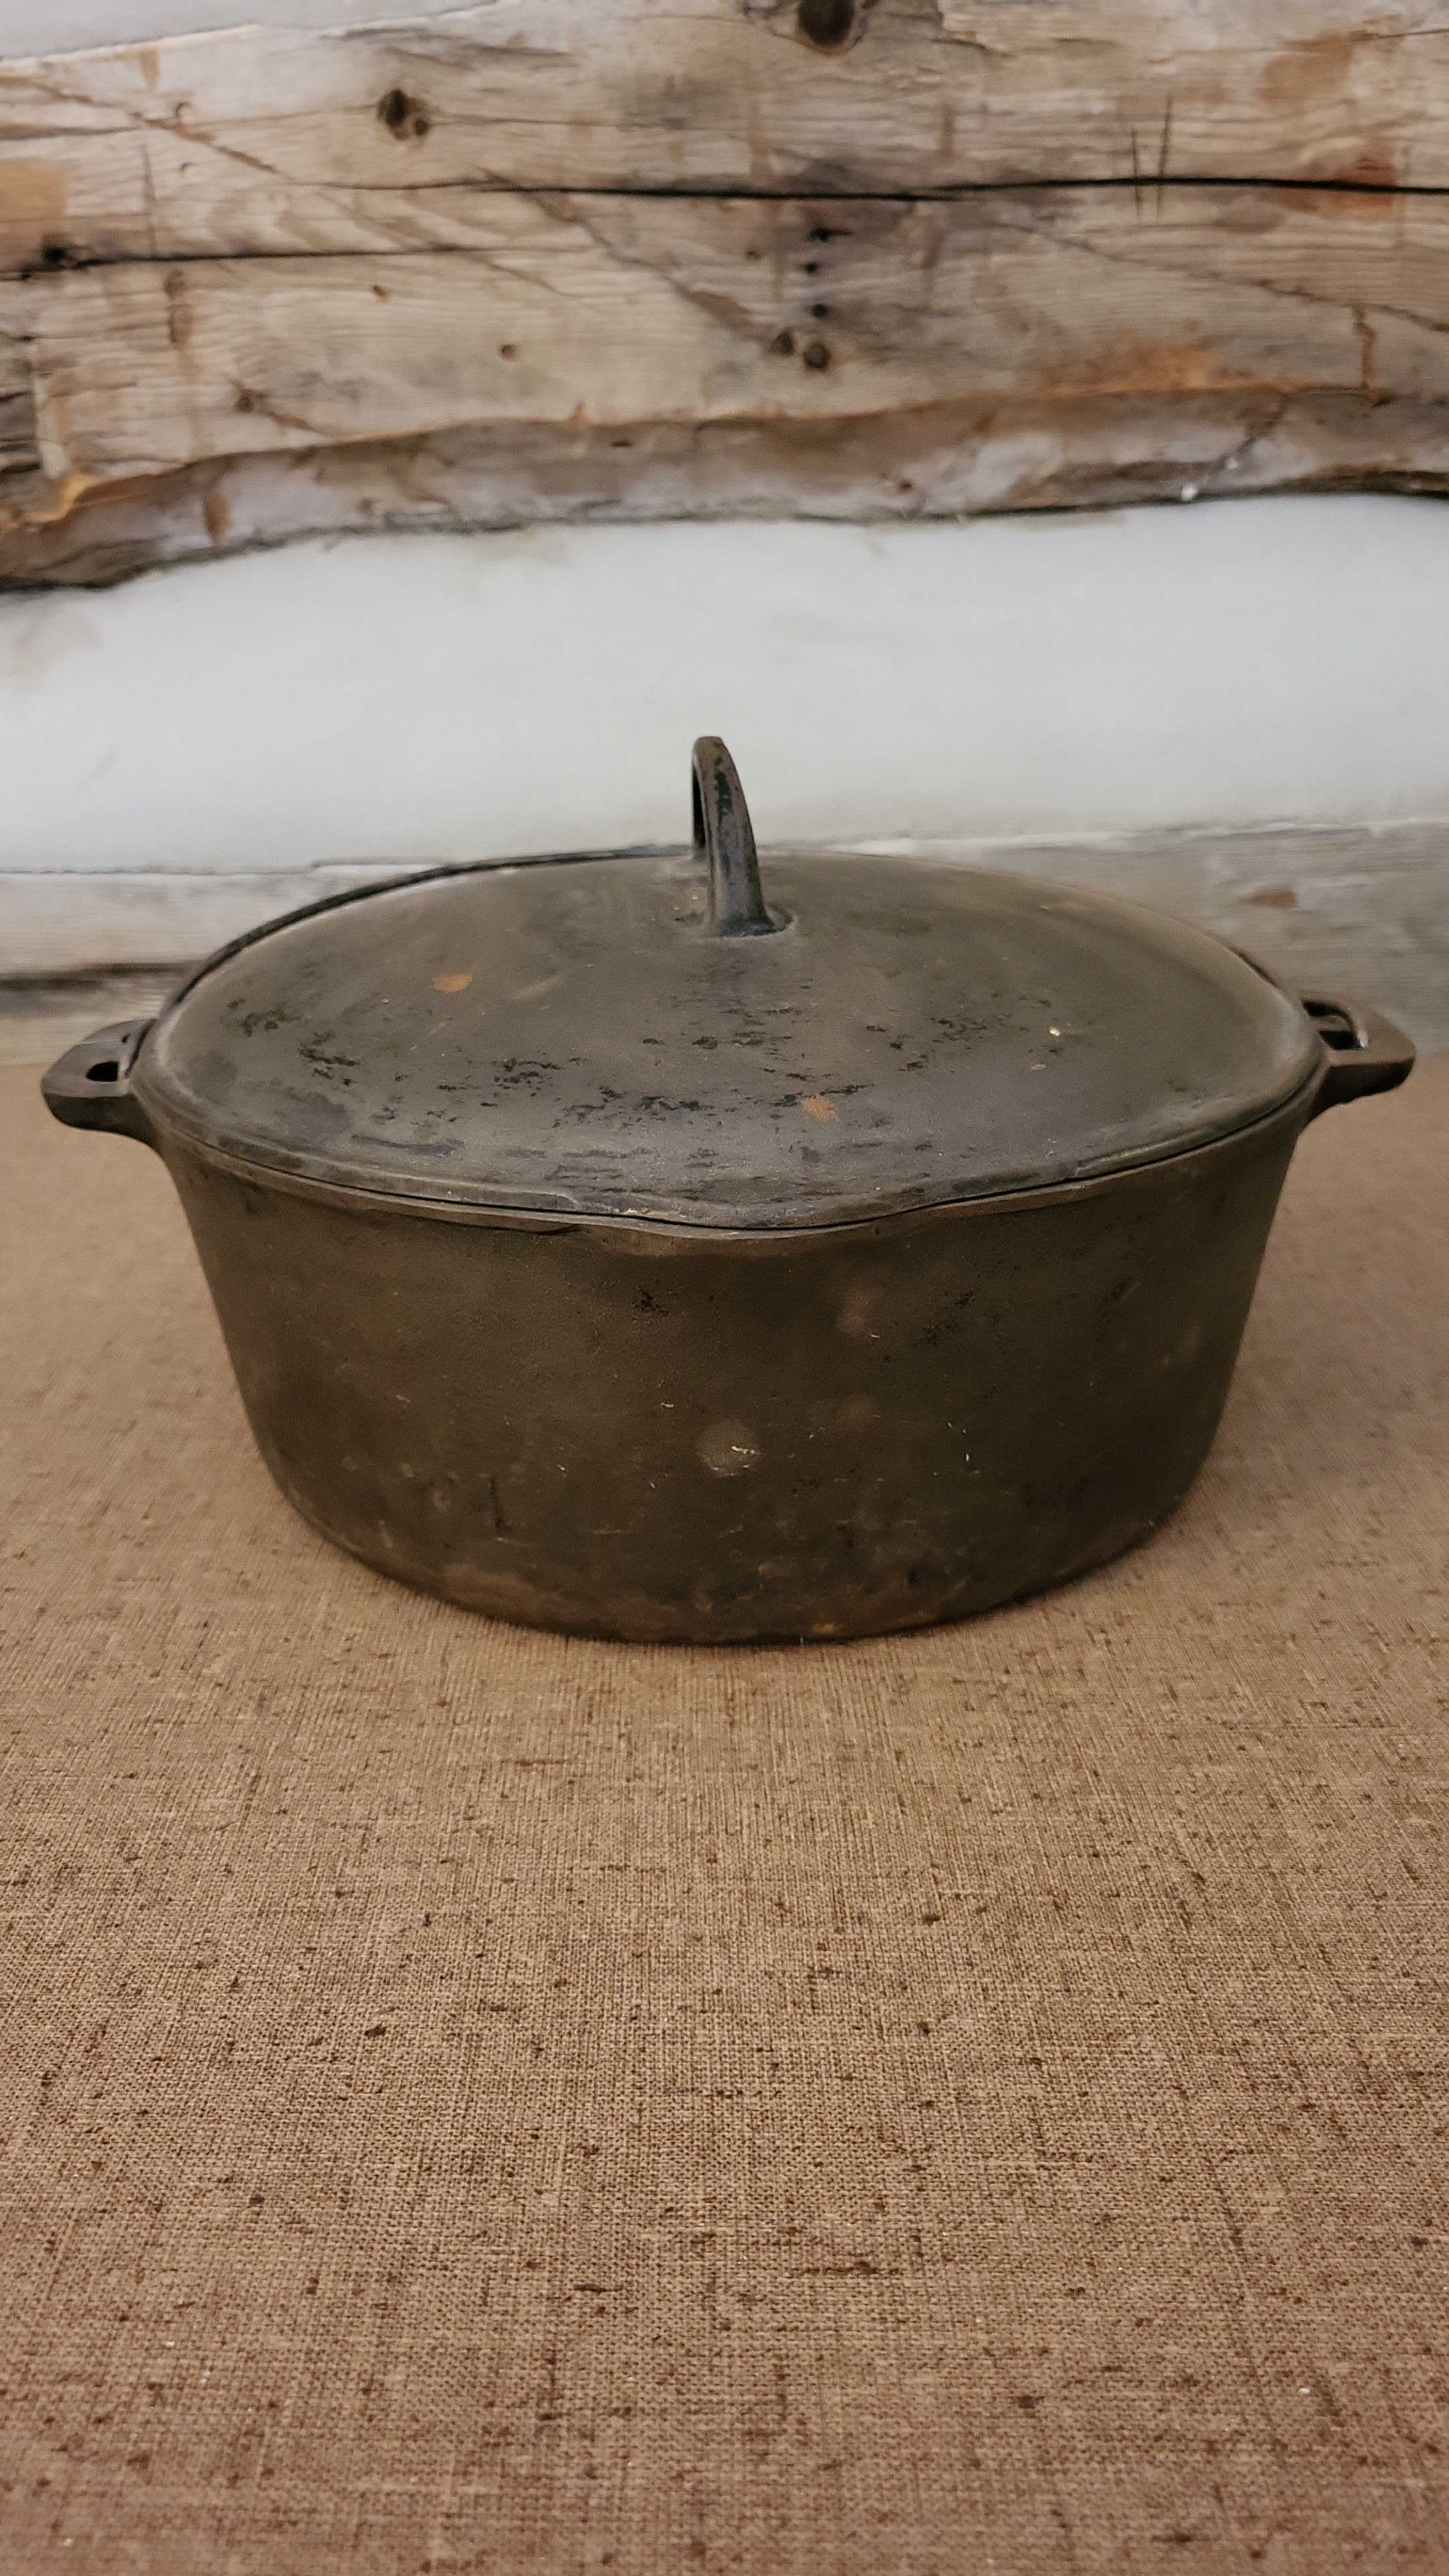 Dutch Ovens for sale in Pittsburgh, Pennsylvania